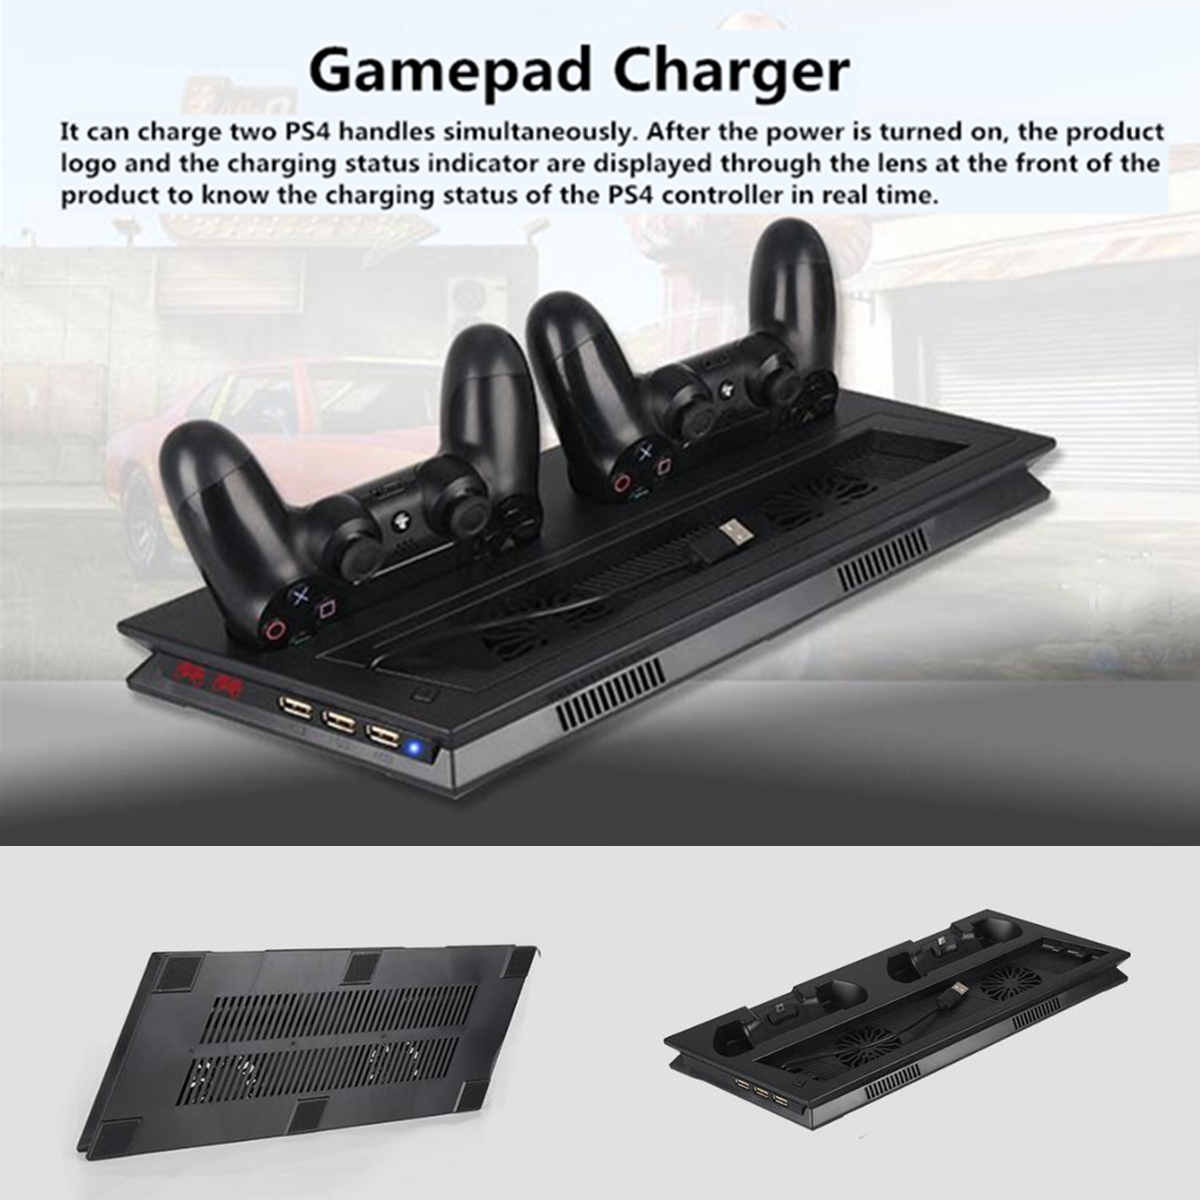 LED Charger Station Stand Charging Dock Cooling Fan for Sony Playstation 4 PS4 PRO Slim Game Console Gamepad 15